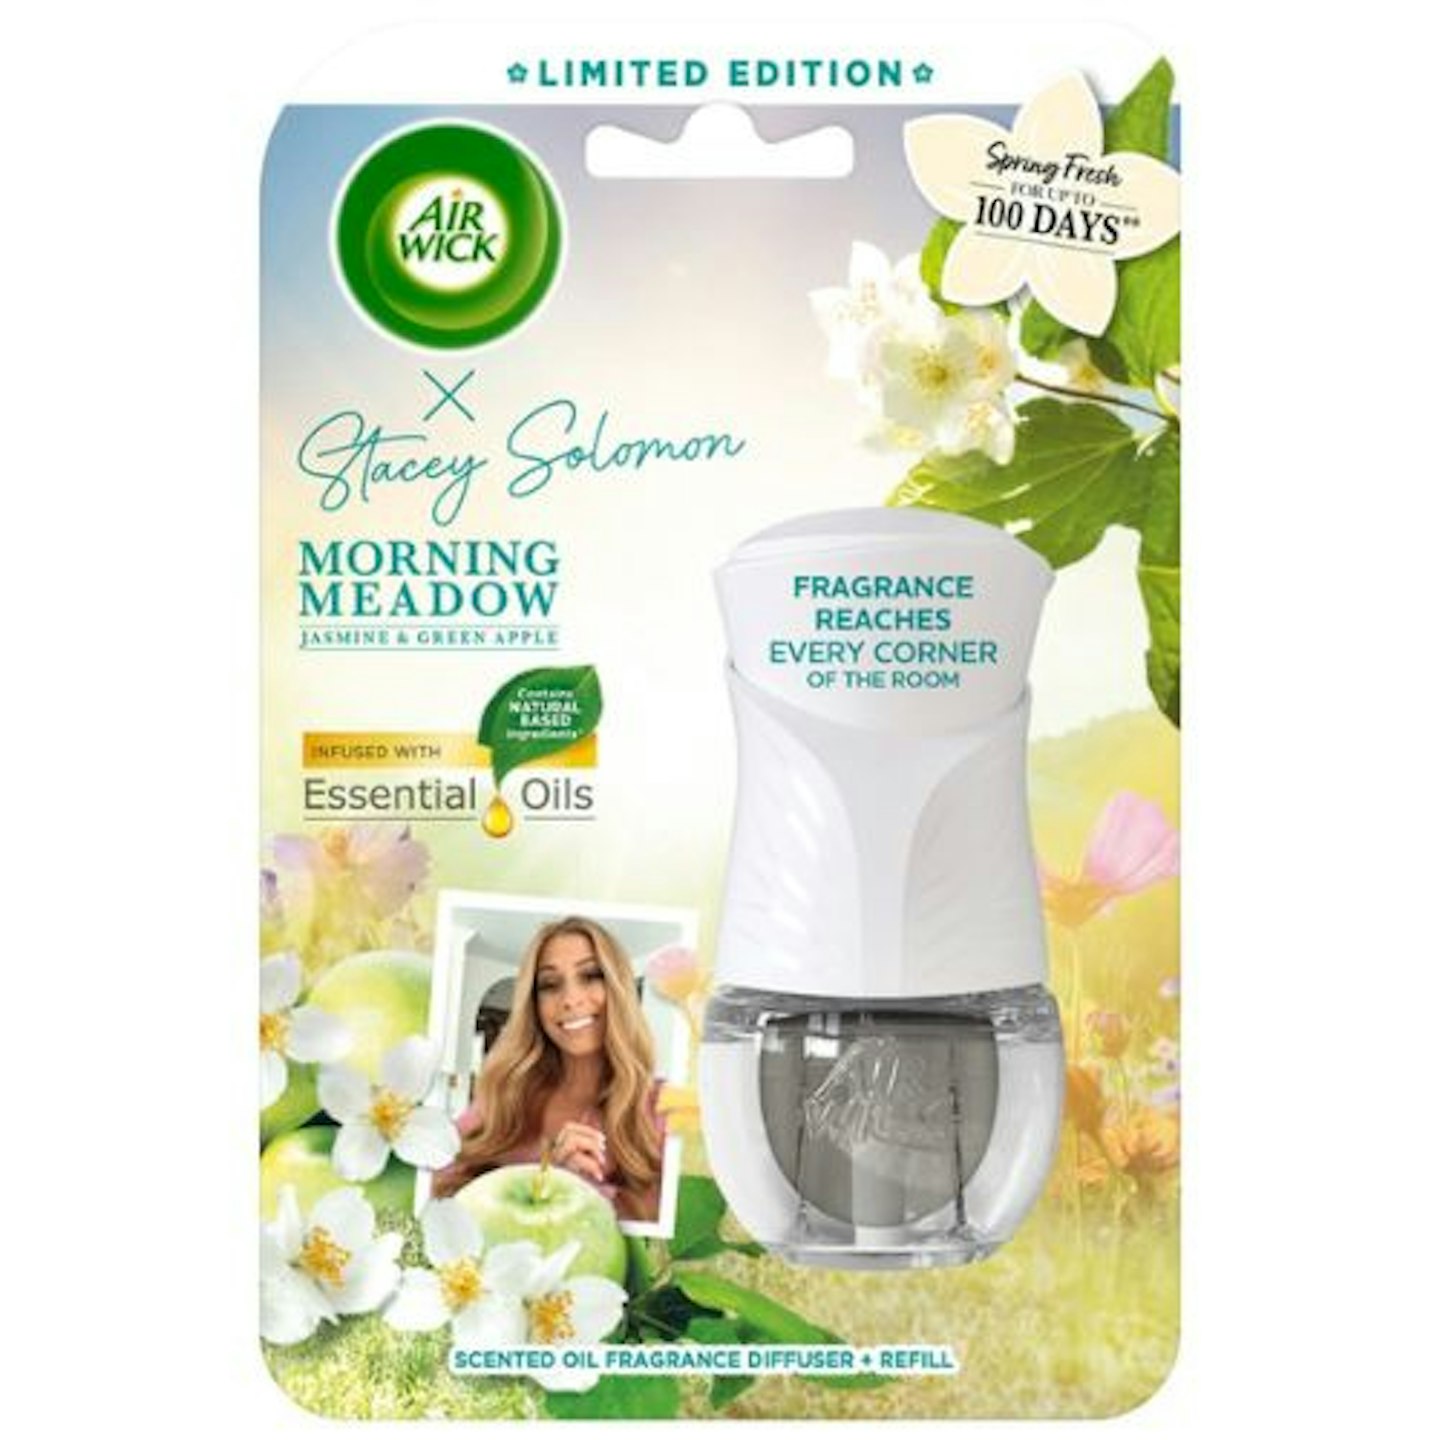 Air Wick Morning Meadow Scented Oil Electrical Plug-In Diffuser 19ml